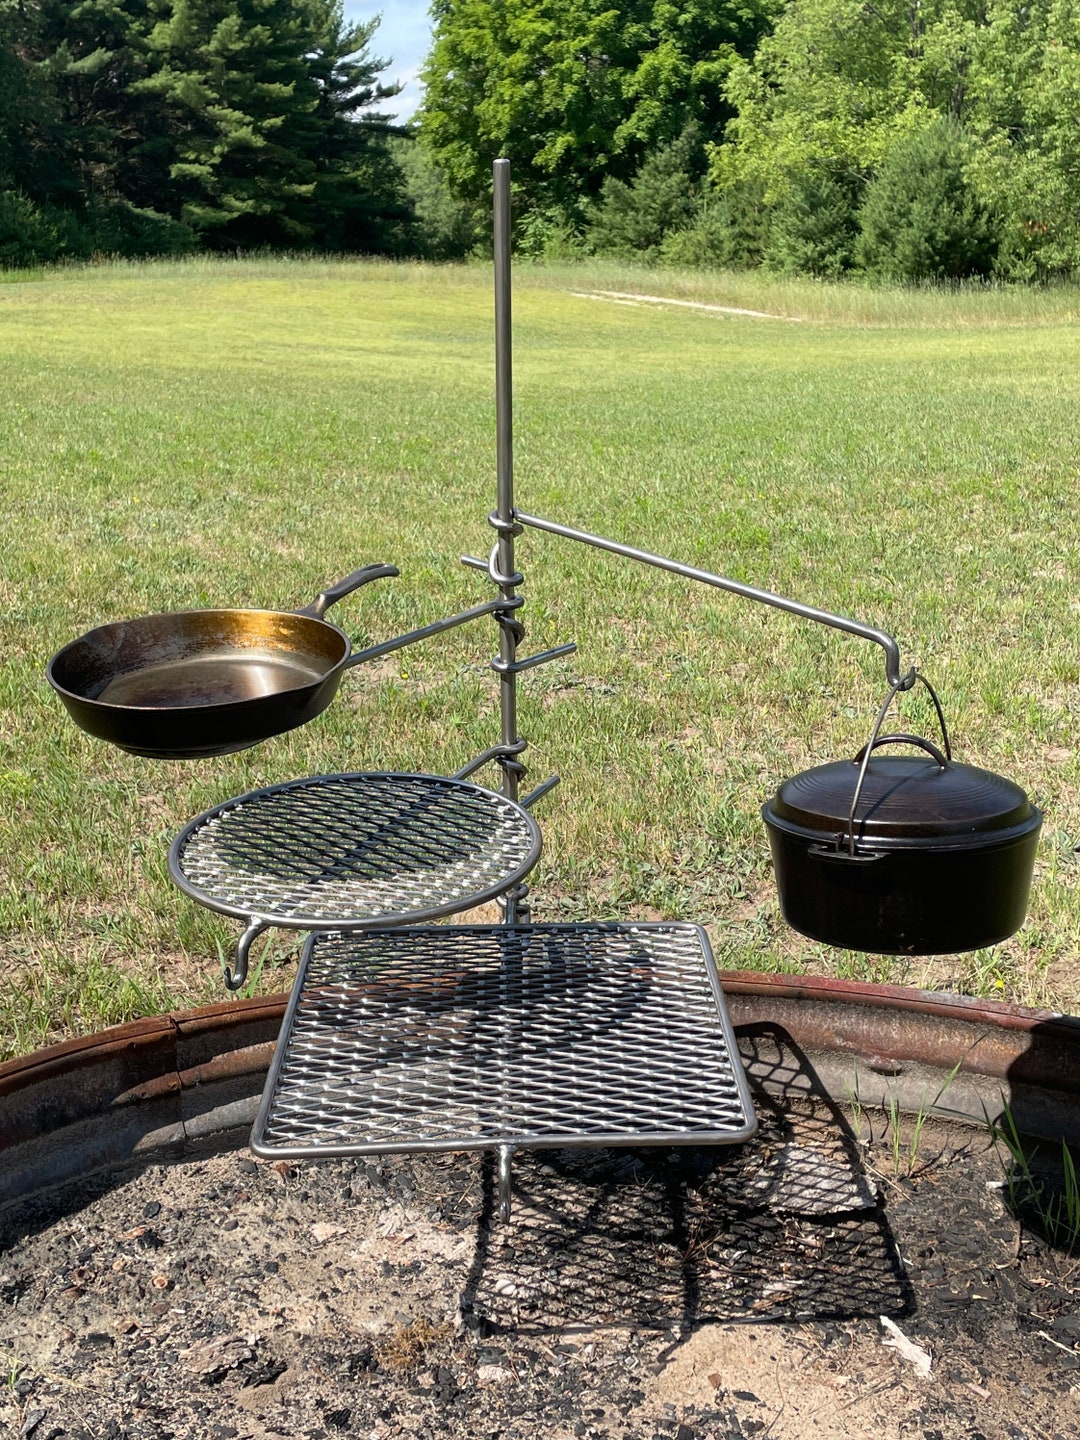 XL Heavy Duty Forged Camp Cooking Tripod Holds OVER 95 POUNDS Seen